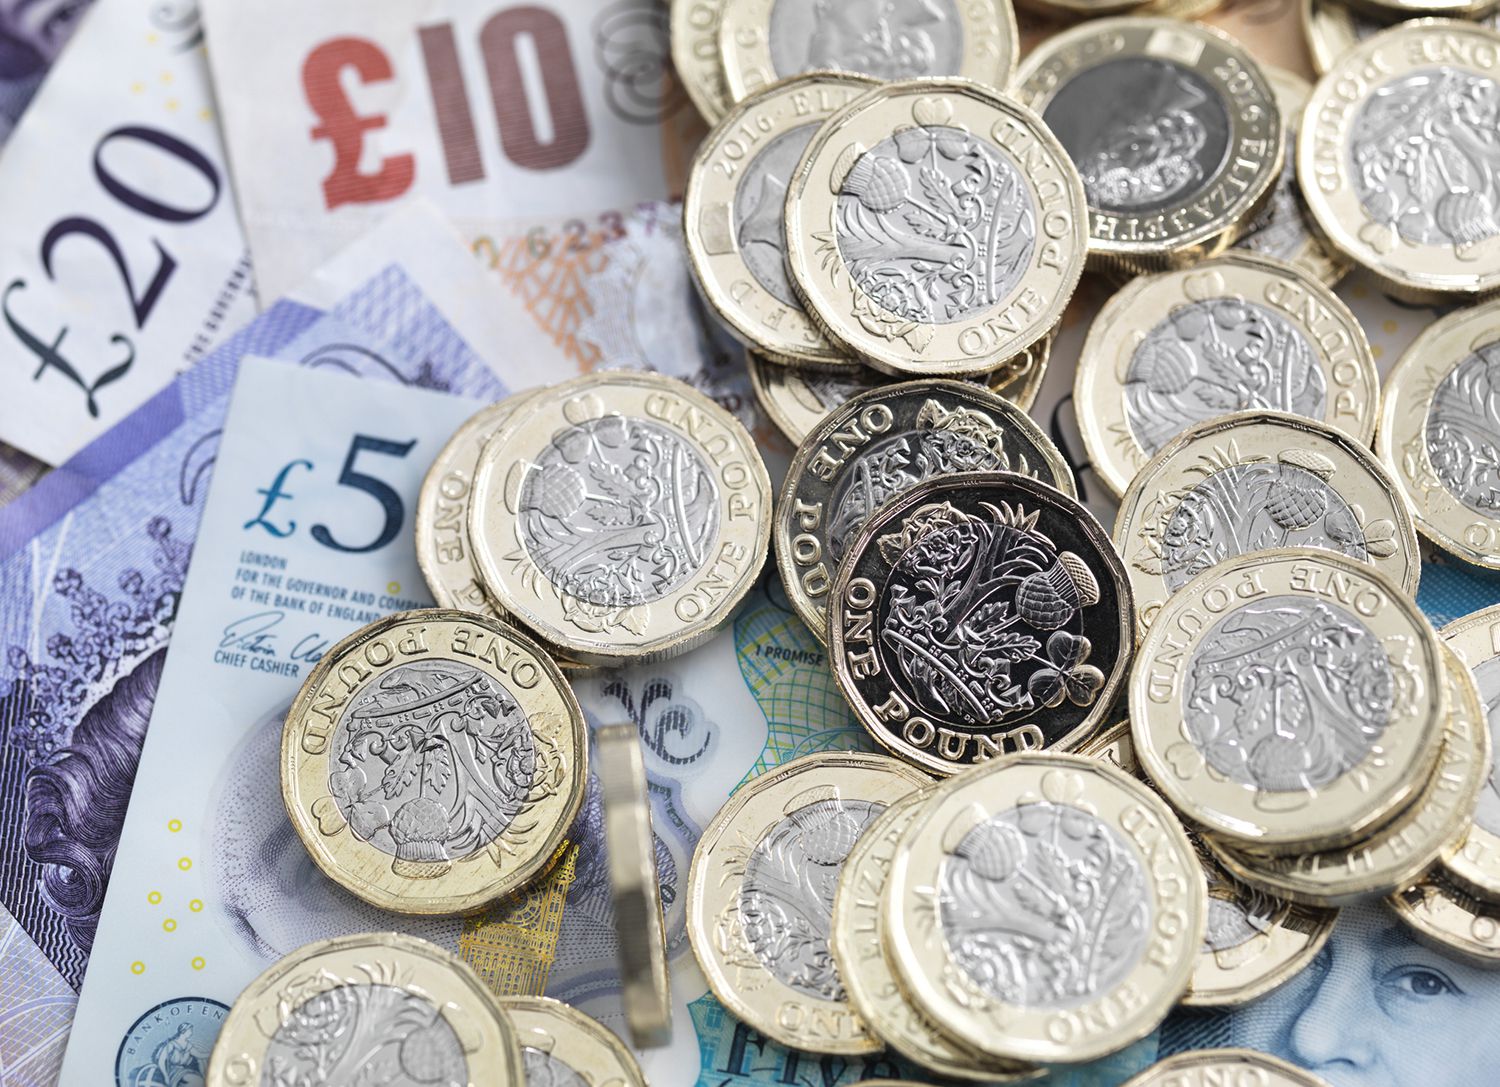 Why the British Pound Is Stronger Than the U.S. Dollar